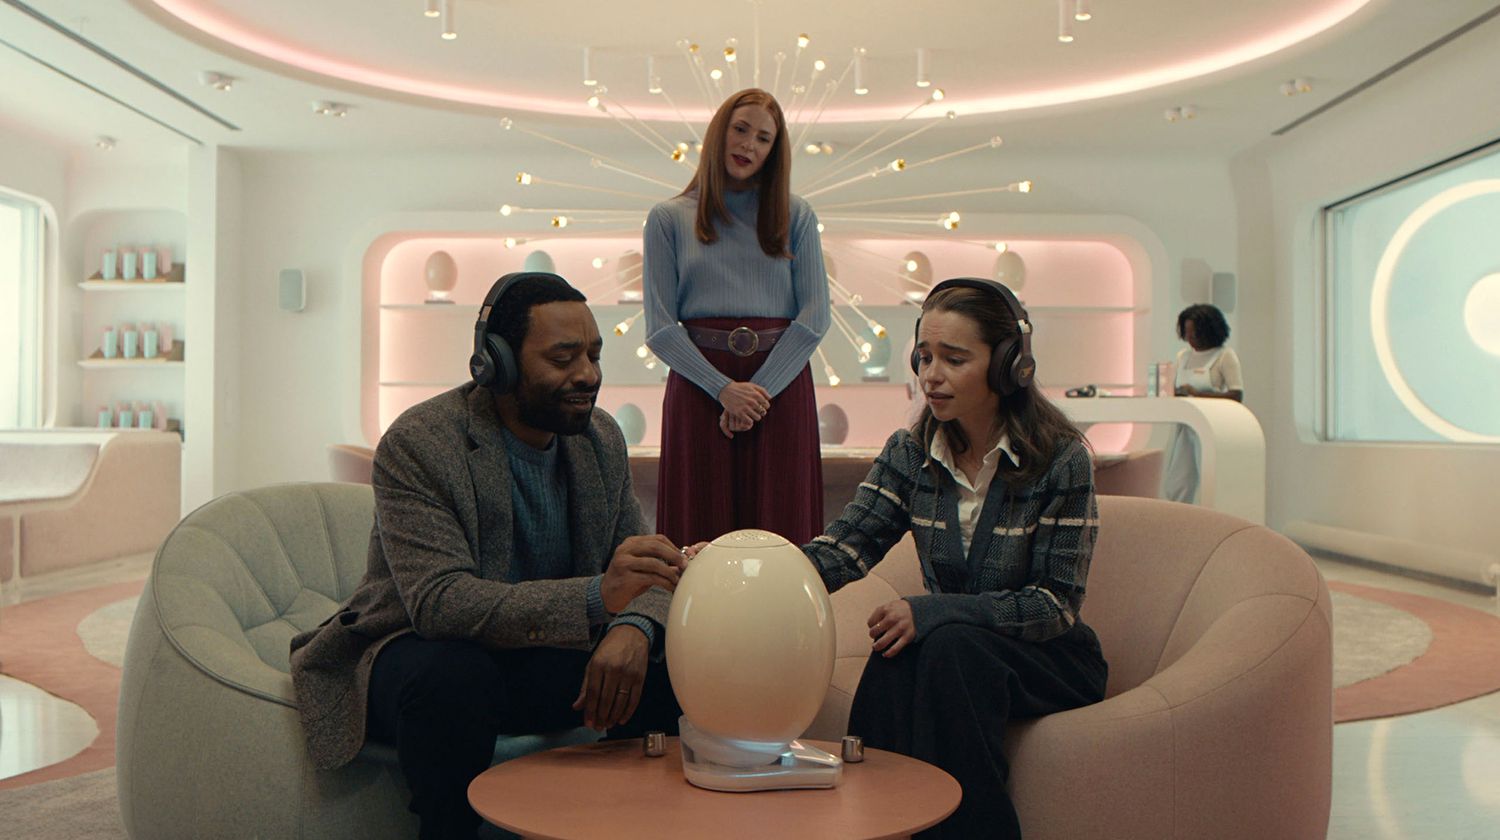 Emilia Clarke, Chiwetel and Rosalie Craig appear in a still from The Pod Generation